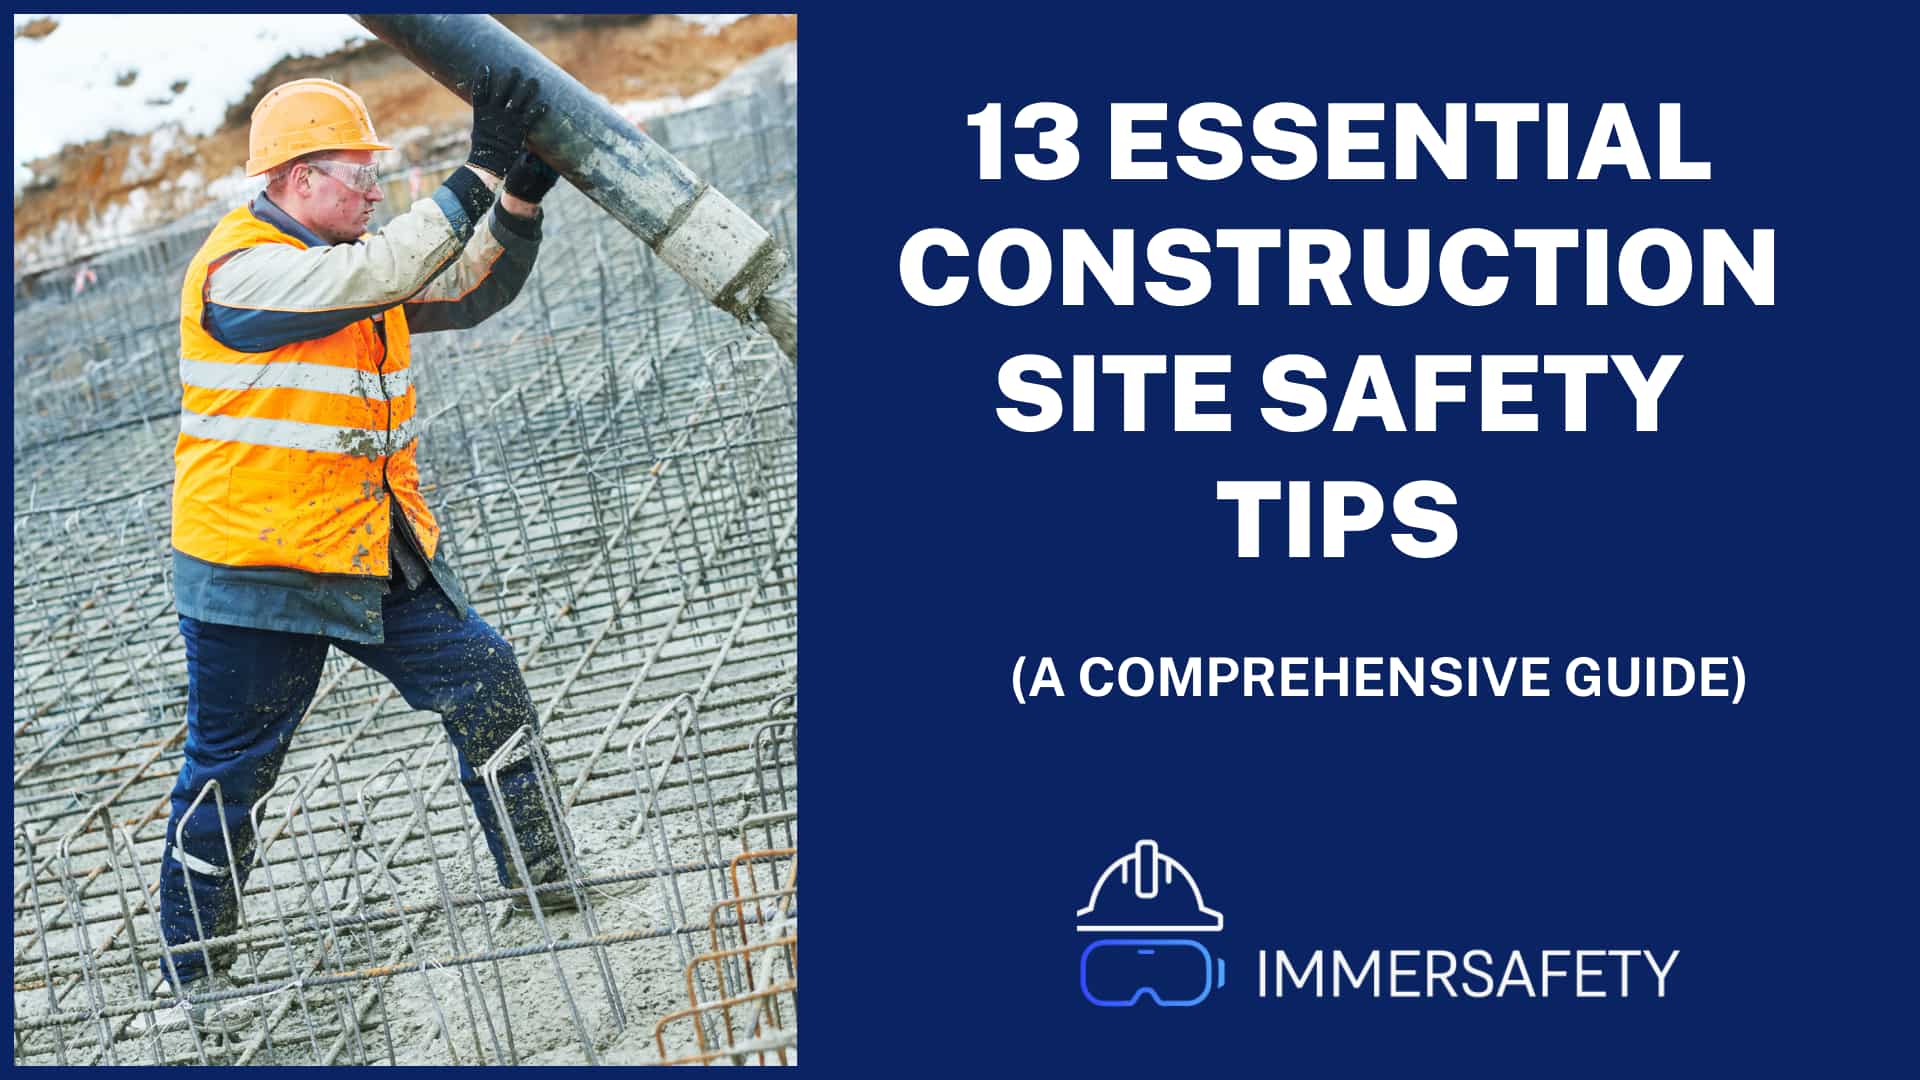 5 Standard Onsite Construction Best Practices That Support Safety